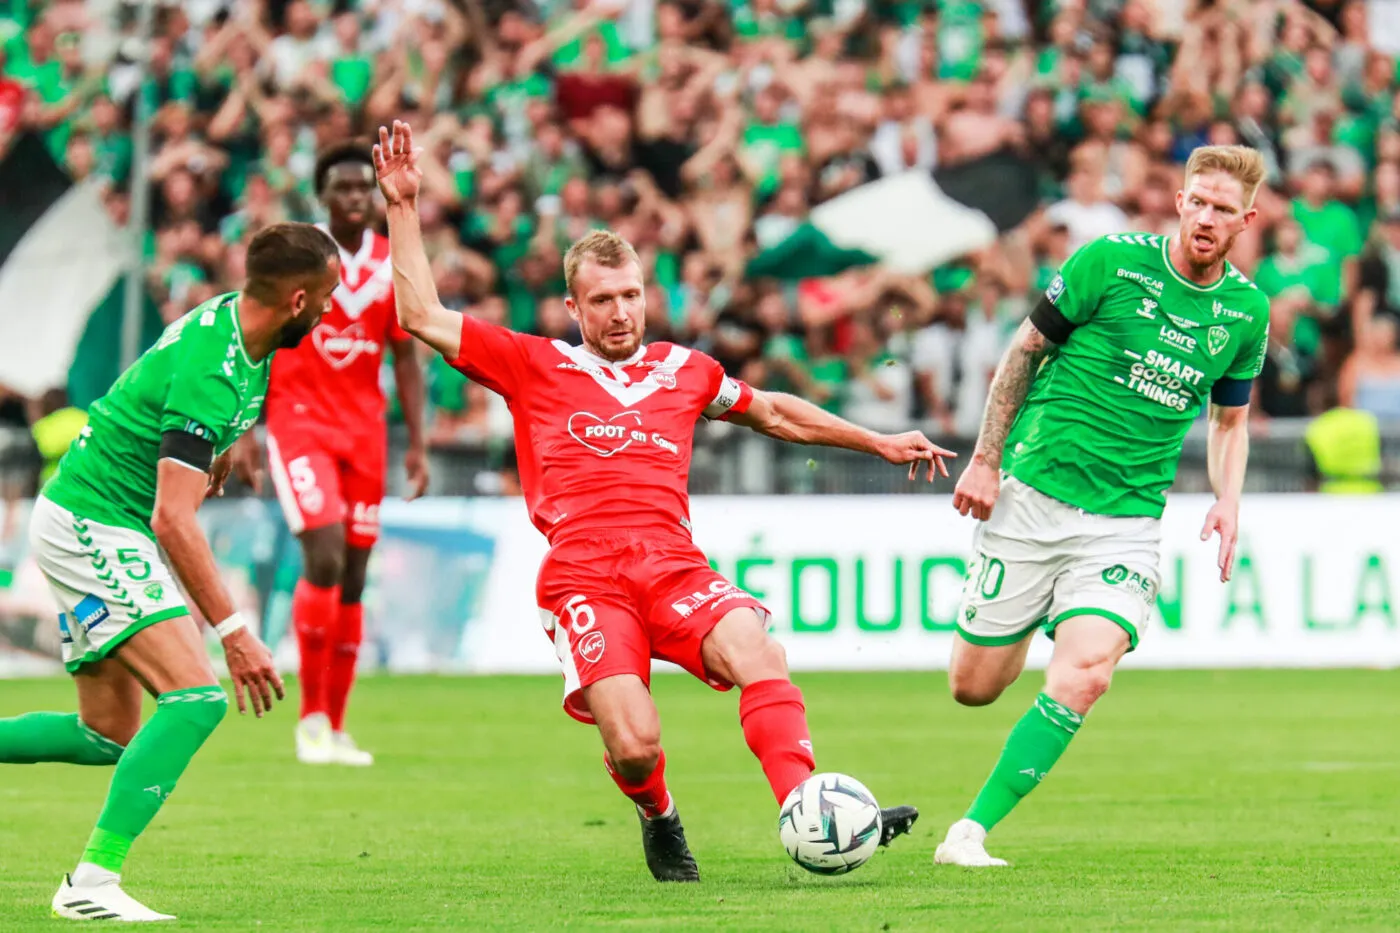 Julien MASSON of Valenciennes and Gaetan CHARBONNIER of Saint Etienne during the Ligue 2 BKT match between Association Sportive de Saint-Etienne and Valenciennes Football Club at Stade Geoffroy-Guichard on September 2, 2023 in Saint-Etienne, France. (Photo by Romain Biard/Icon Sport)